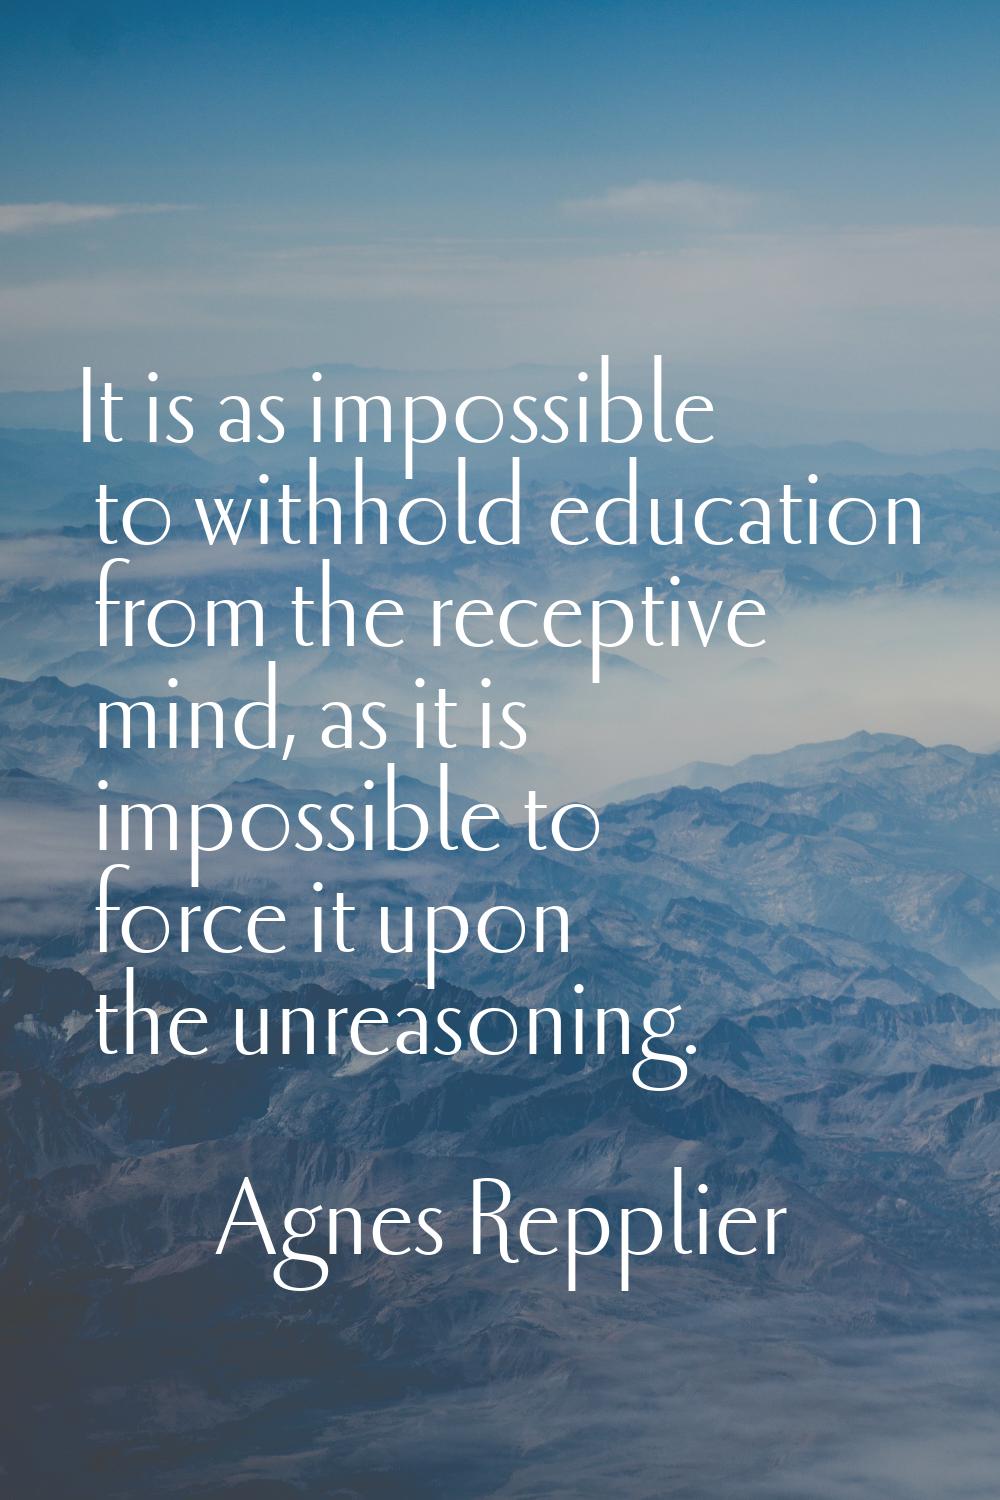 It is as impossible to withhold education from the receptive mind, as it is impossible to force it 